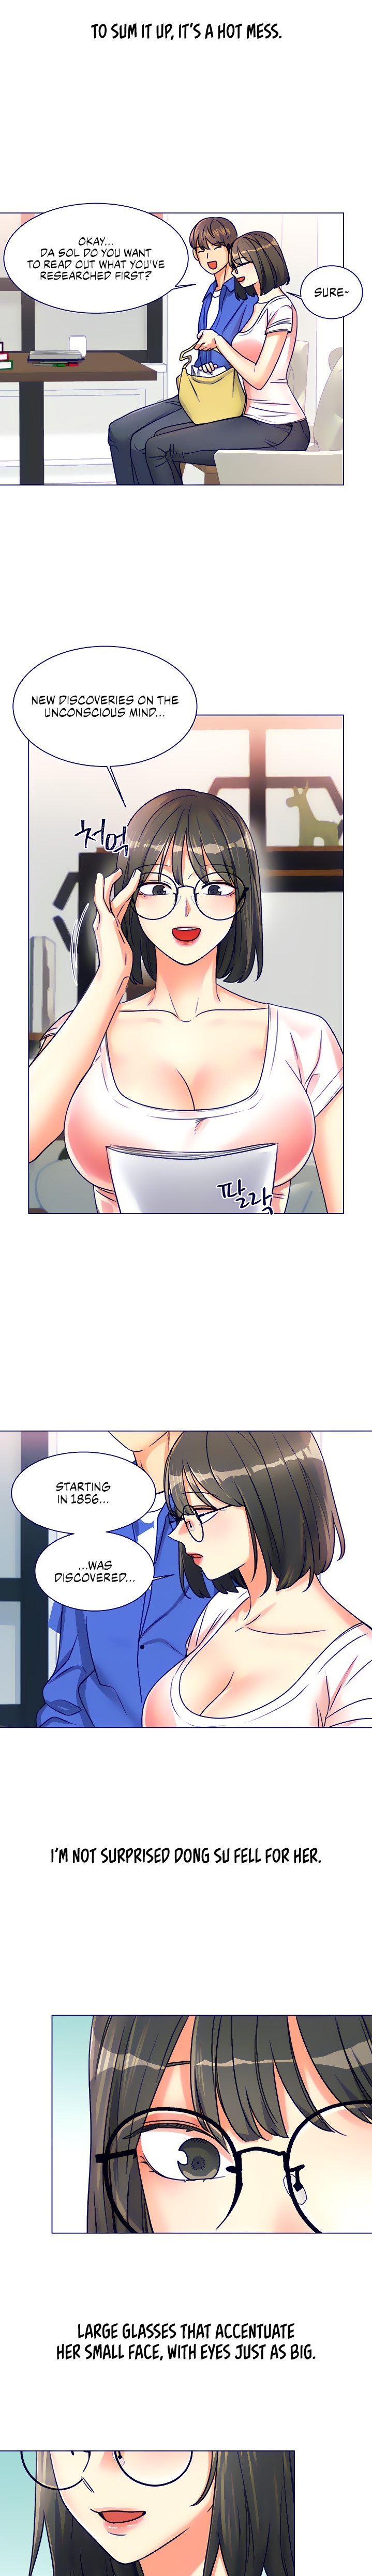 My girlfriend is so naughty - Chapter 11 Page 18